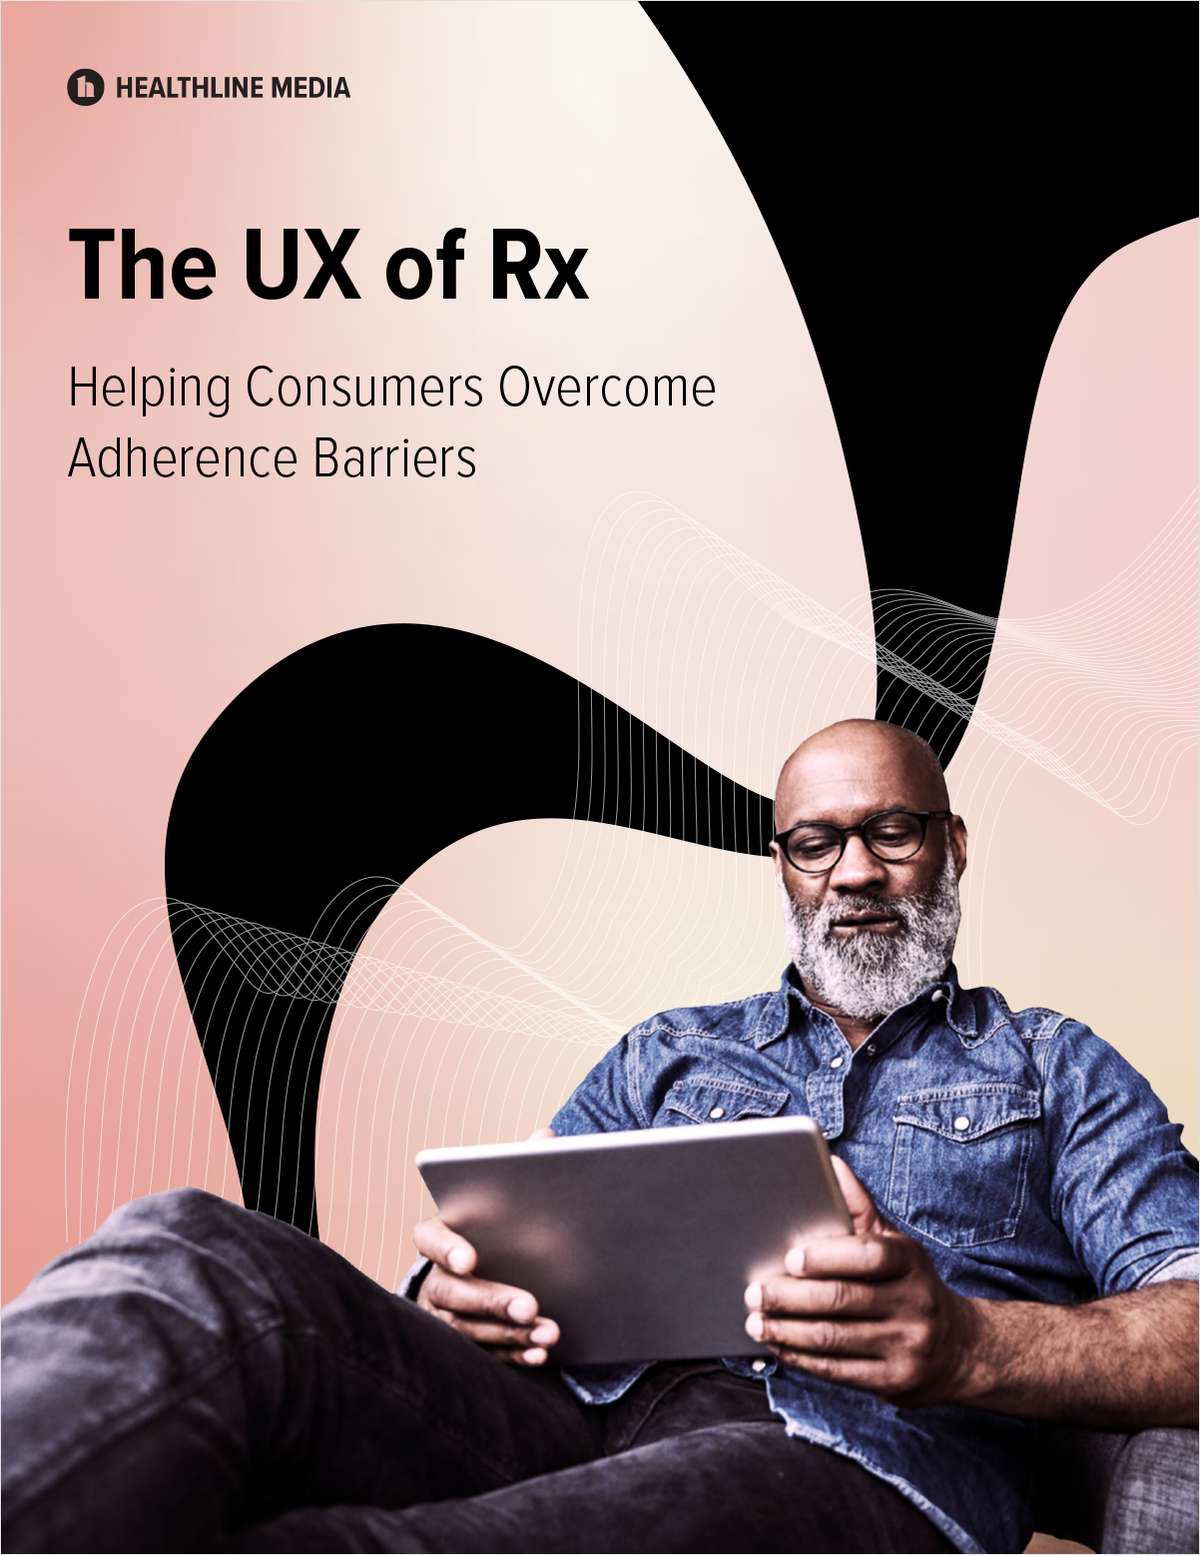 The UX of Rx: Helping Consumers Overcome Adherence Barriers